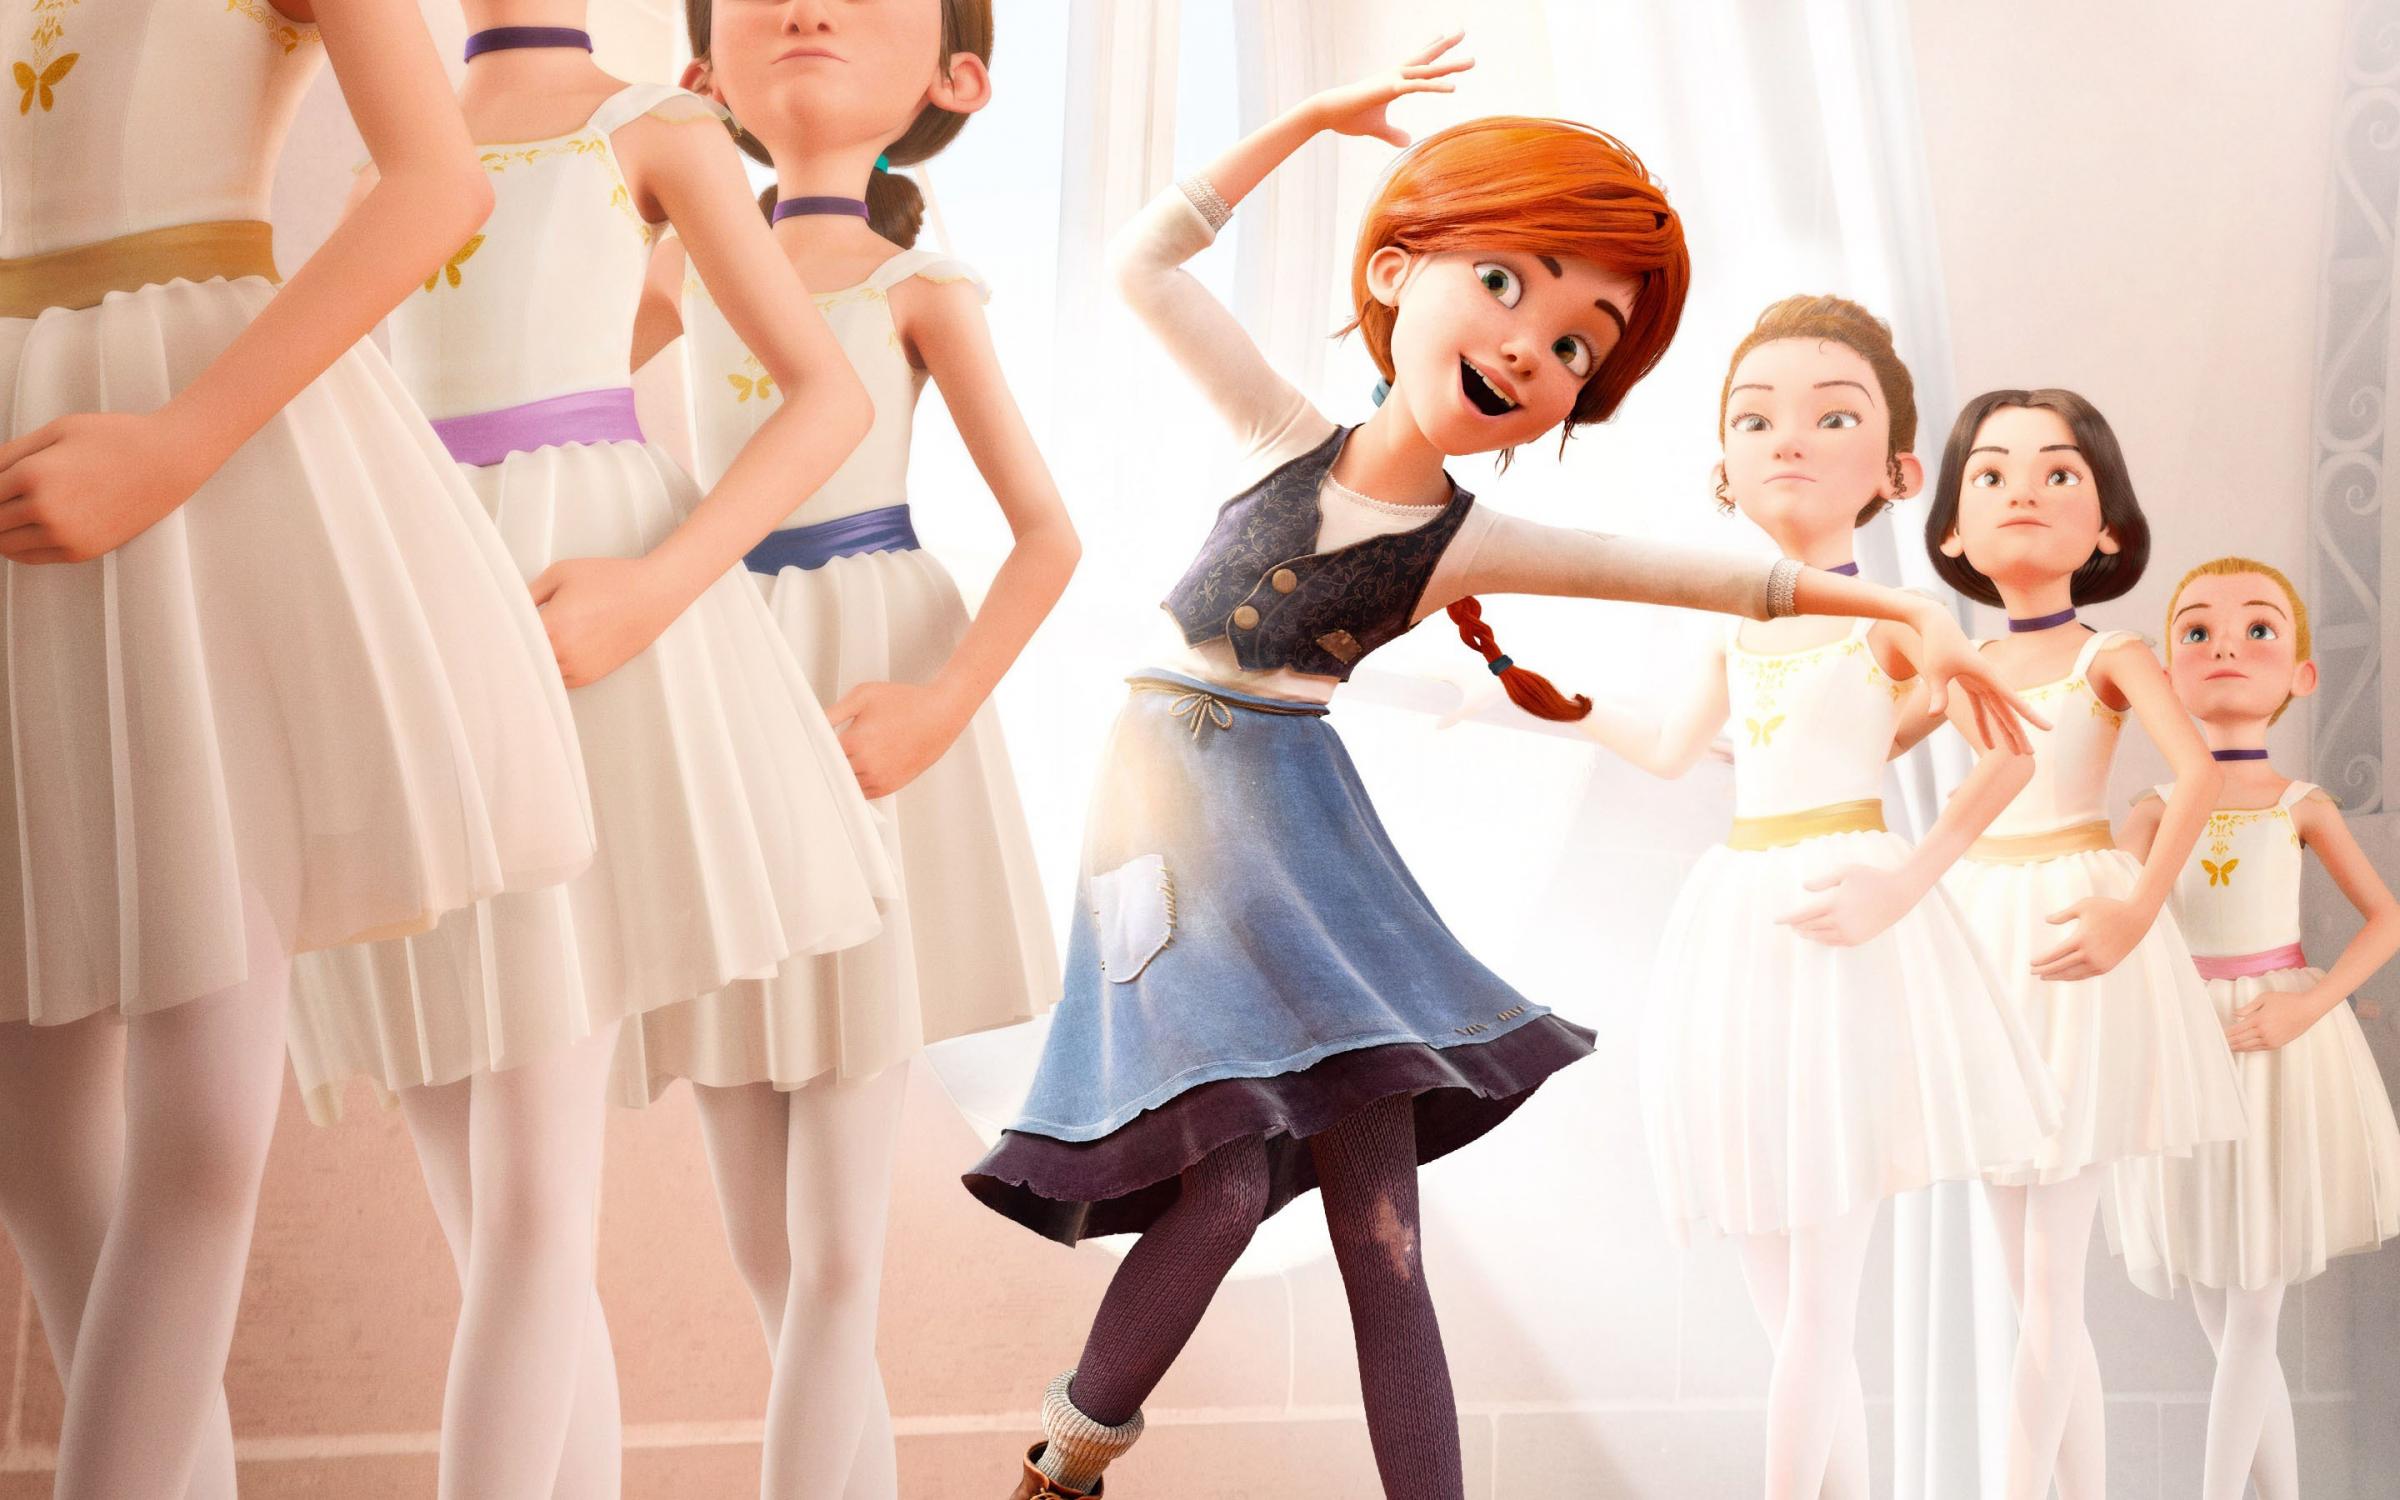 Film review: The surprisingly elegant Ballerina is than a Christmas cash grab | The National